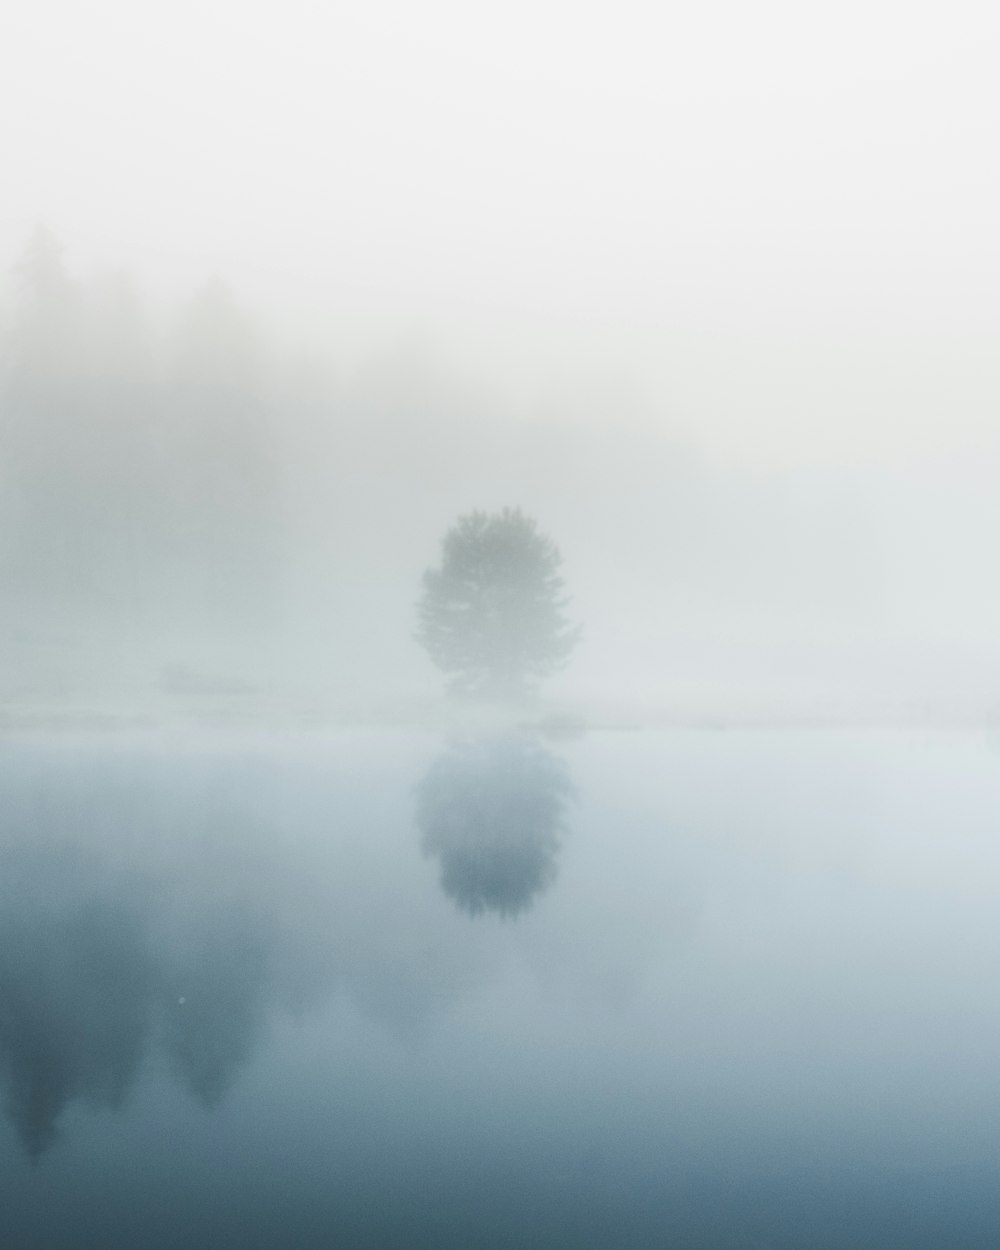 green trees covered with fog